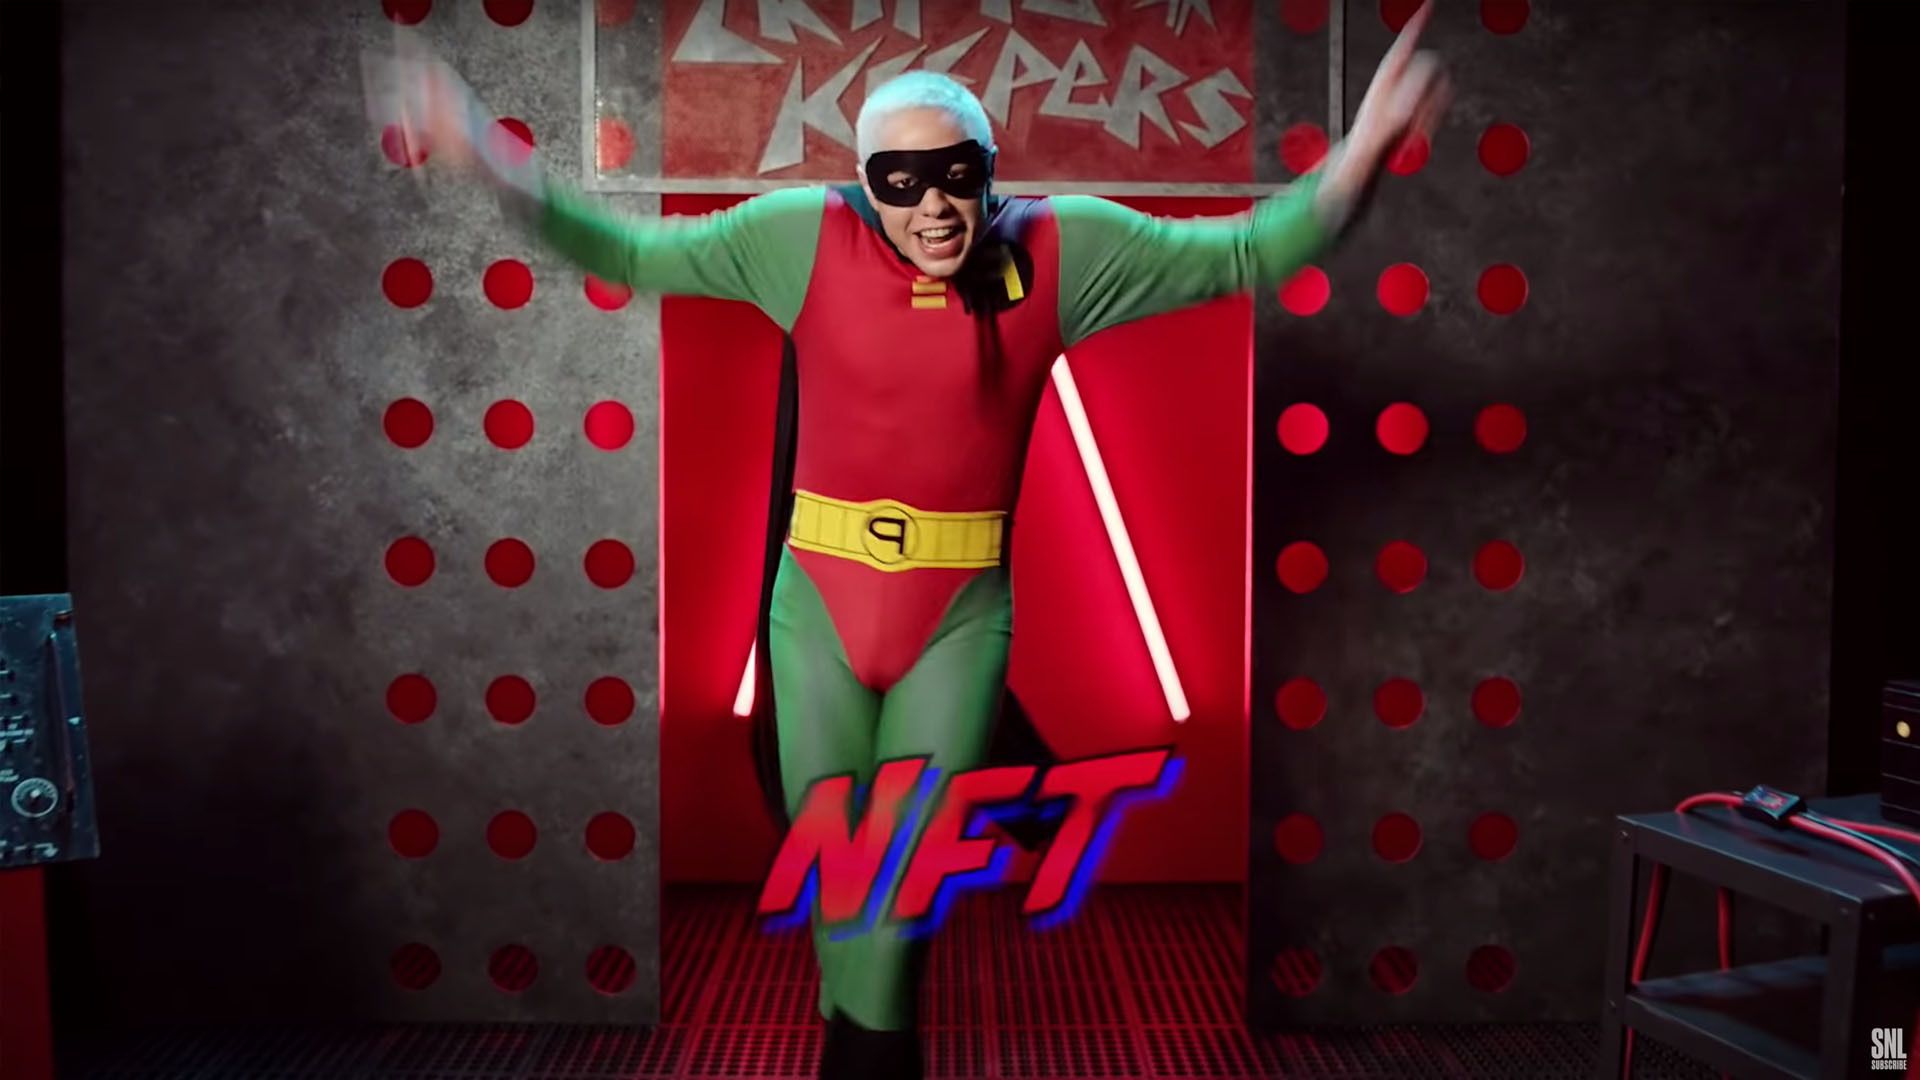 Saturday Night Live comedian Pete Davidson dressed in a Robin costume parodying rapper Eminem with the word NFT in graphics in the foreground